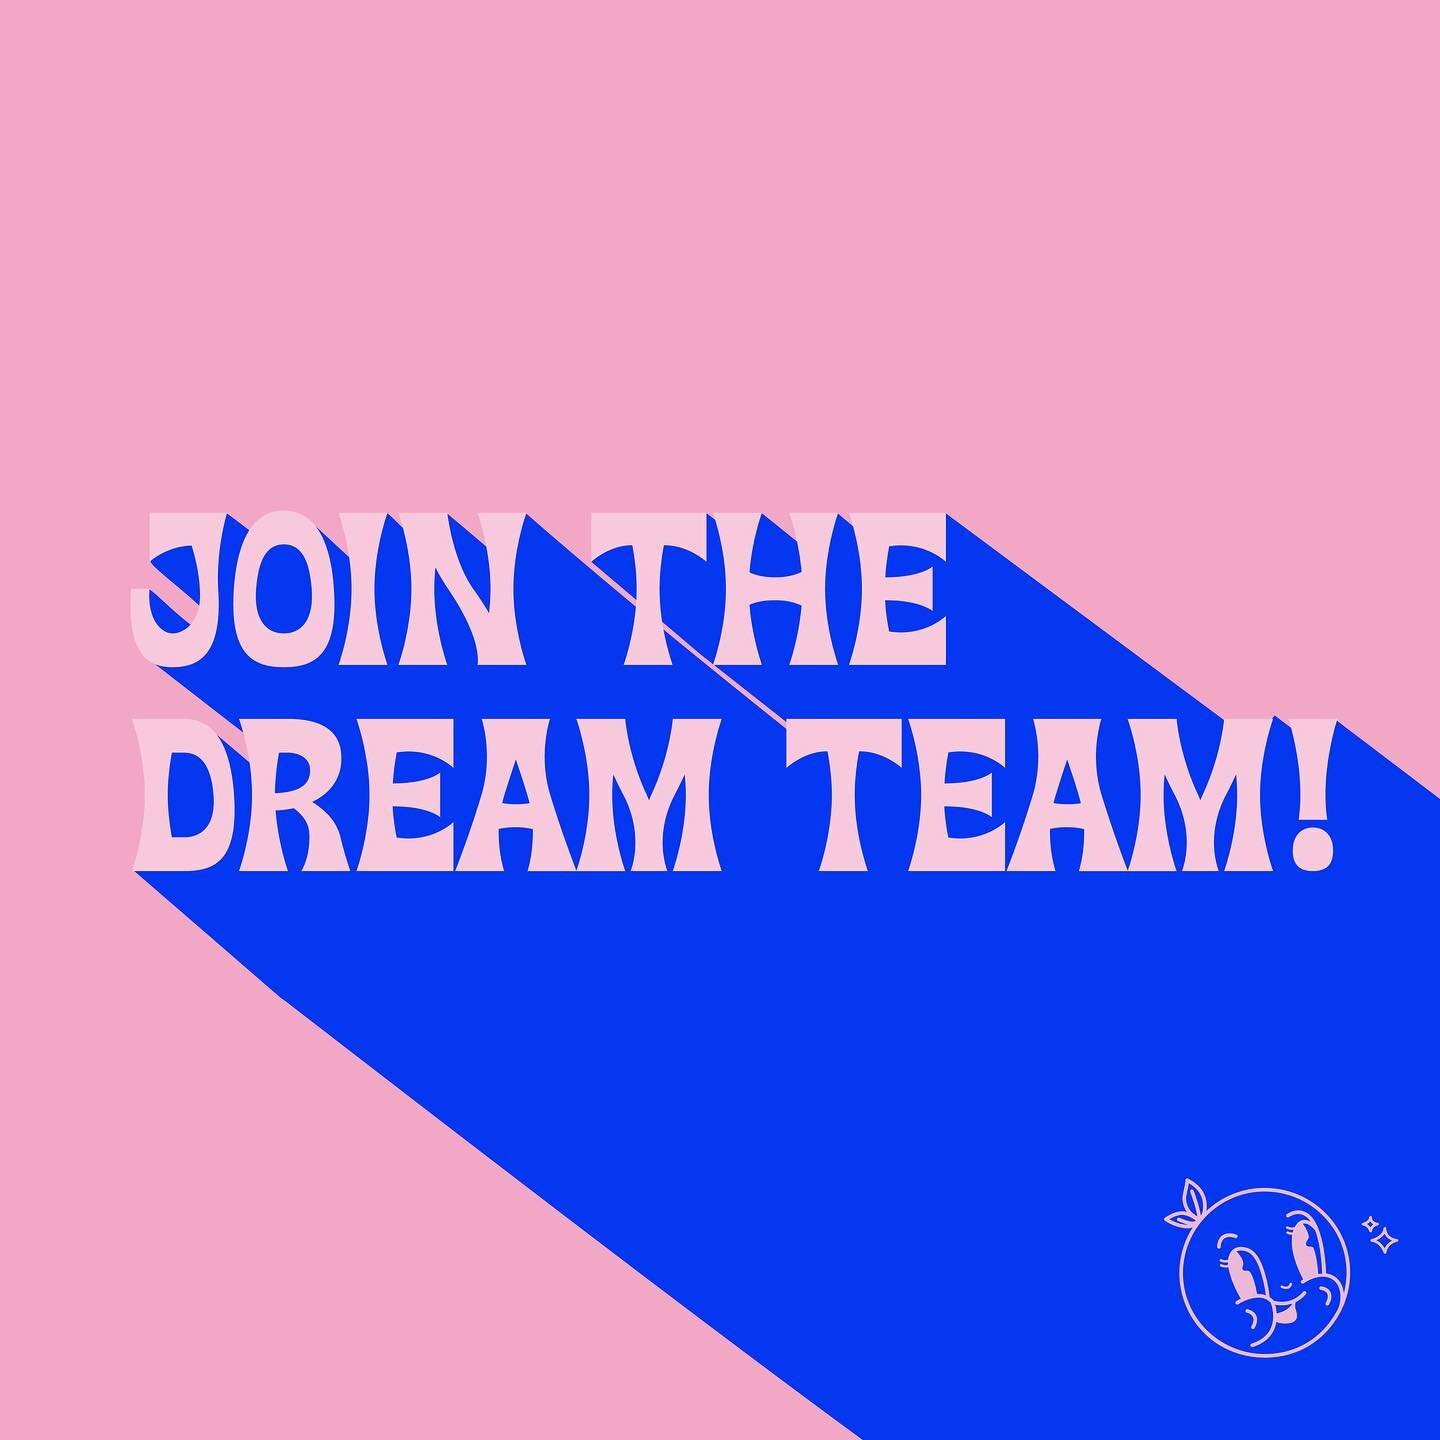 ✨ Join the Dream Team ✨ Now taking applications for the new Hamilton Mill location opening soon, and for Suwanee! Please send any inquiries/resumes if interested to ruby@pearlstea.com ✨